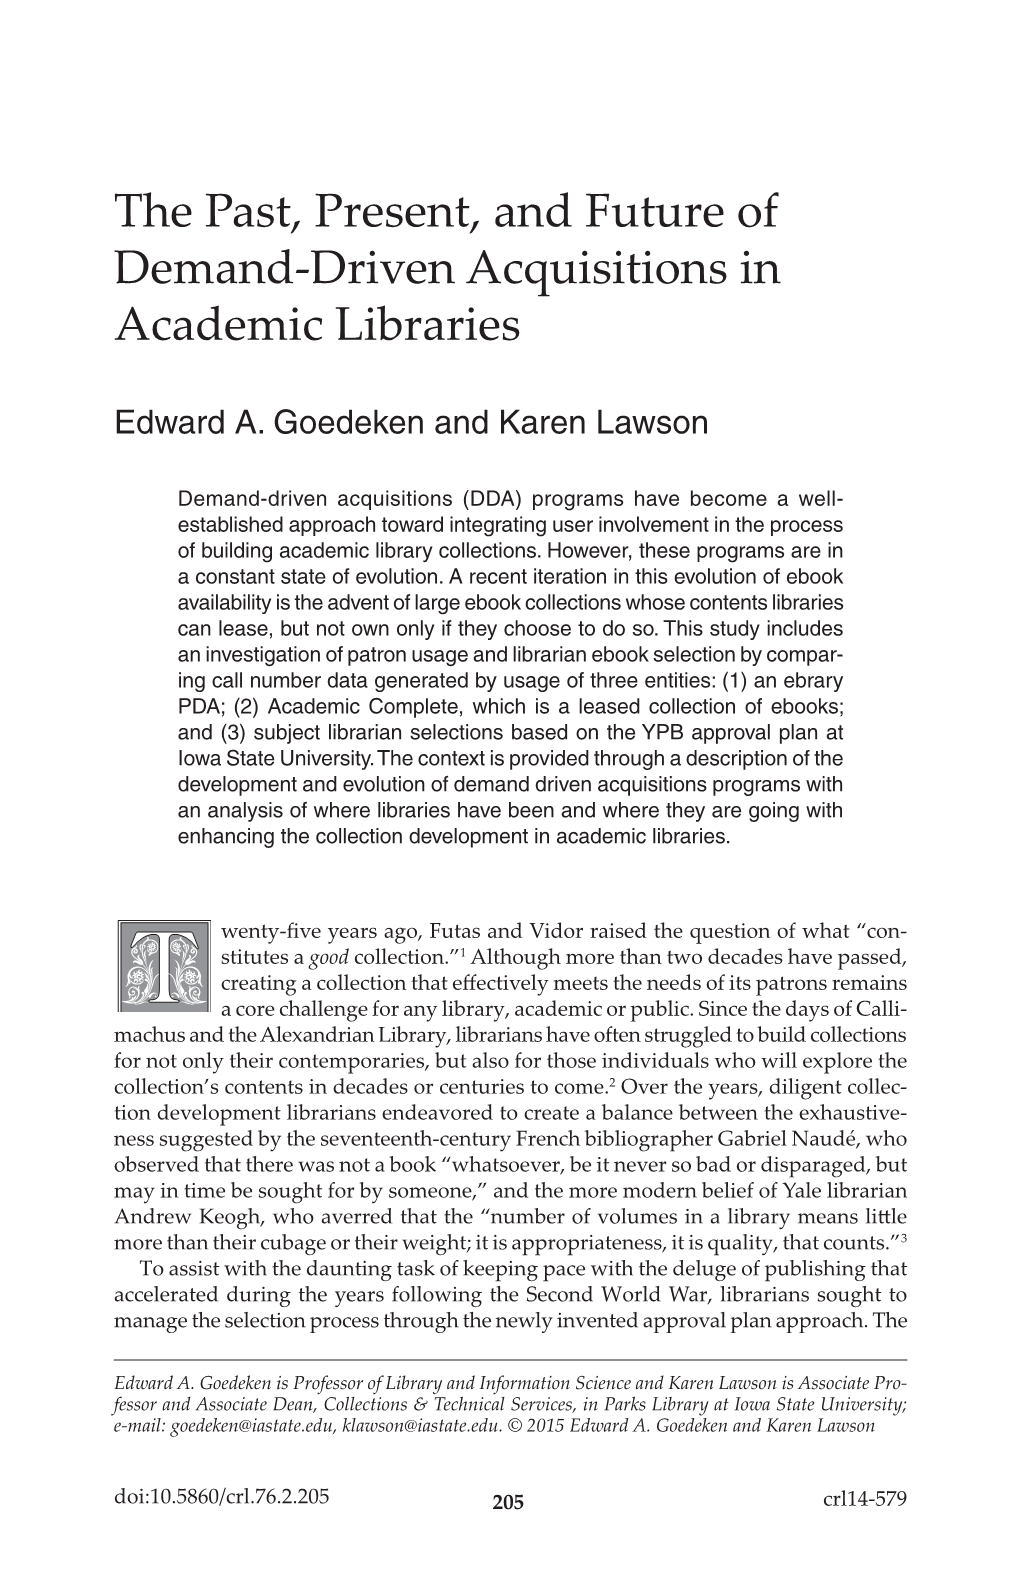 The Past, Present, and Future of Demand-Driven Acquisitions in Academic Libraries